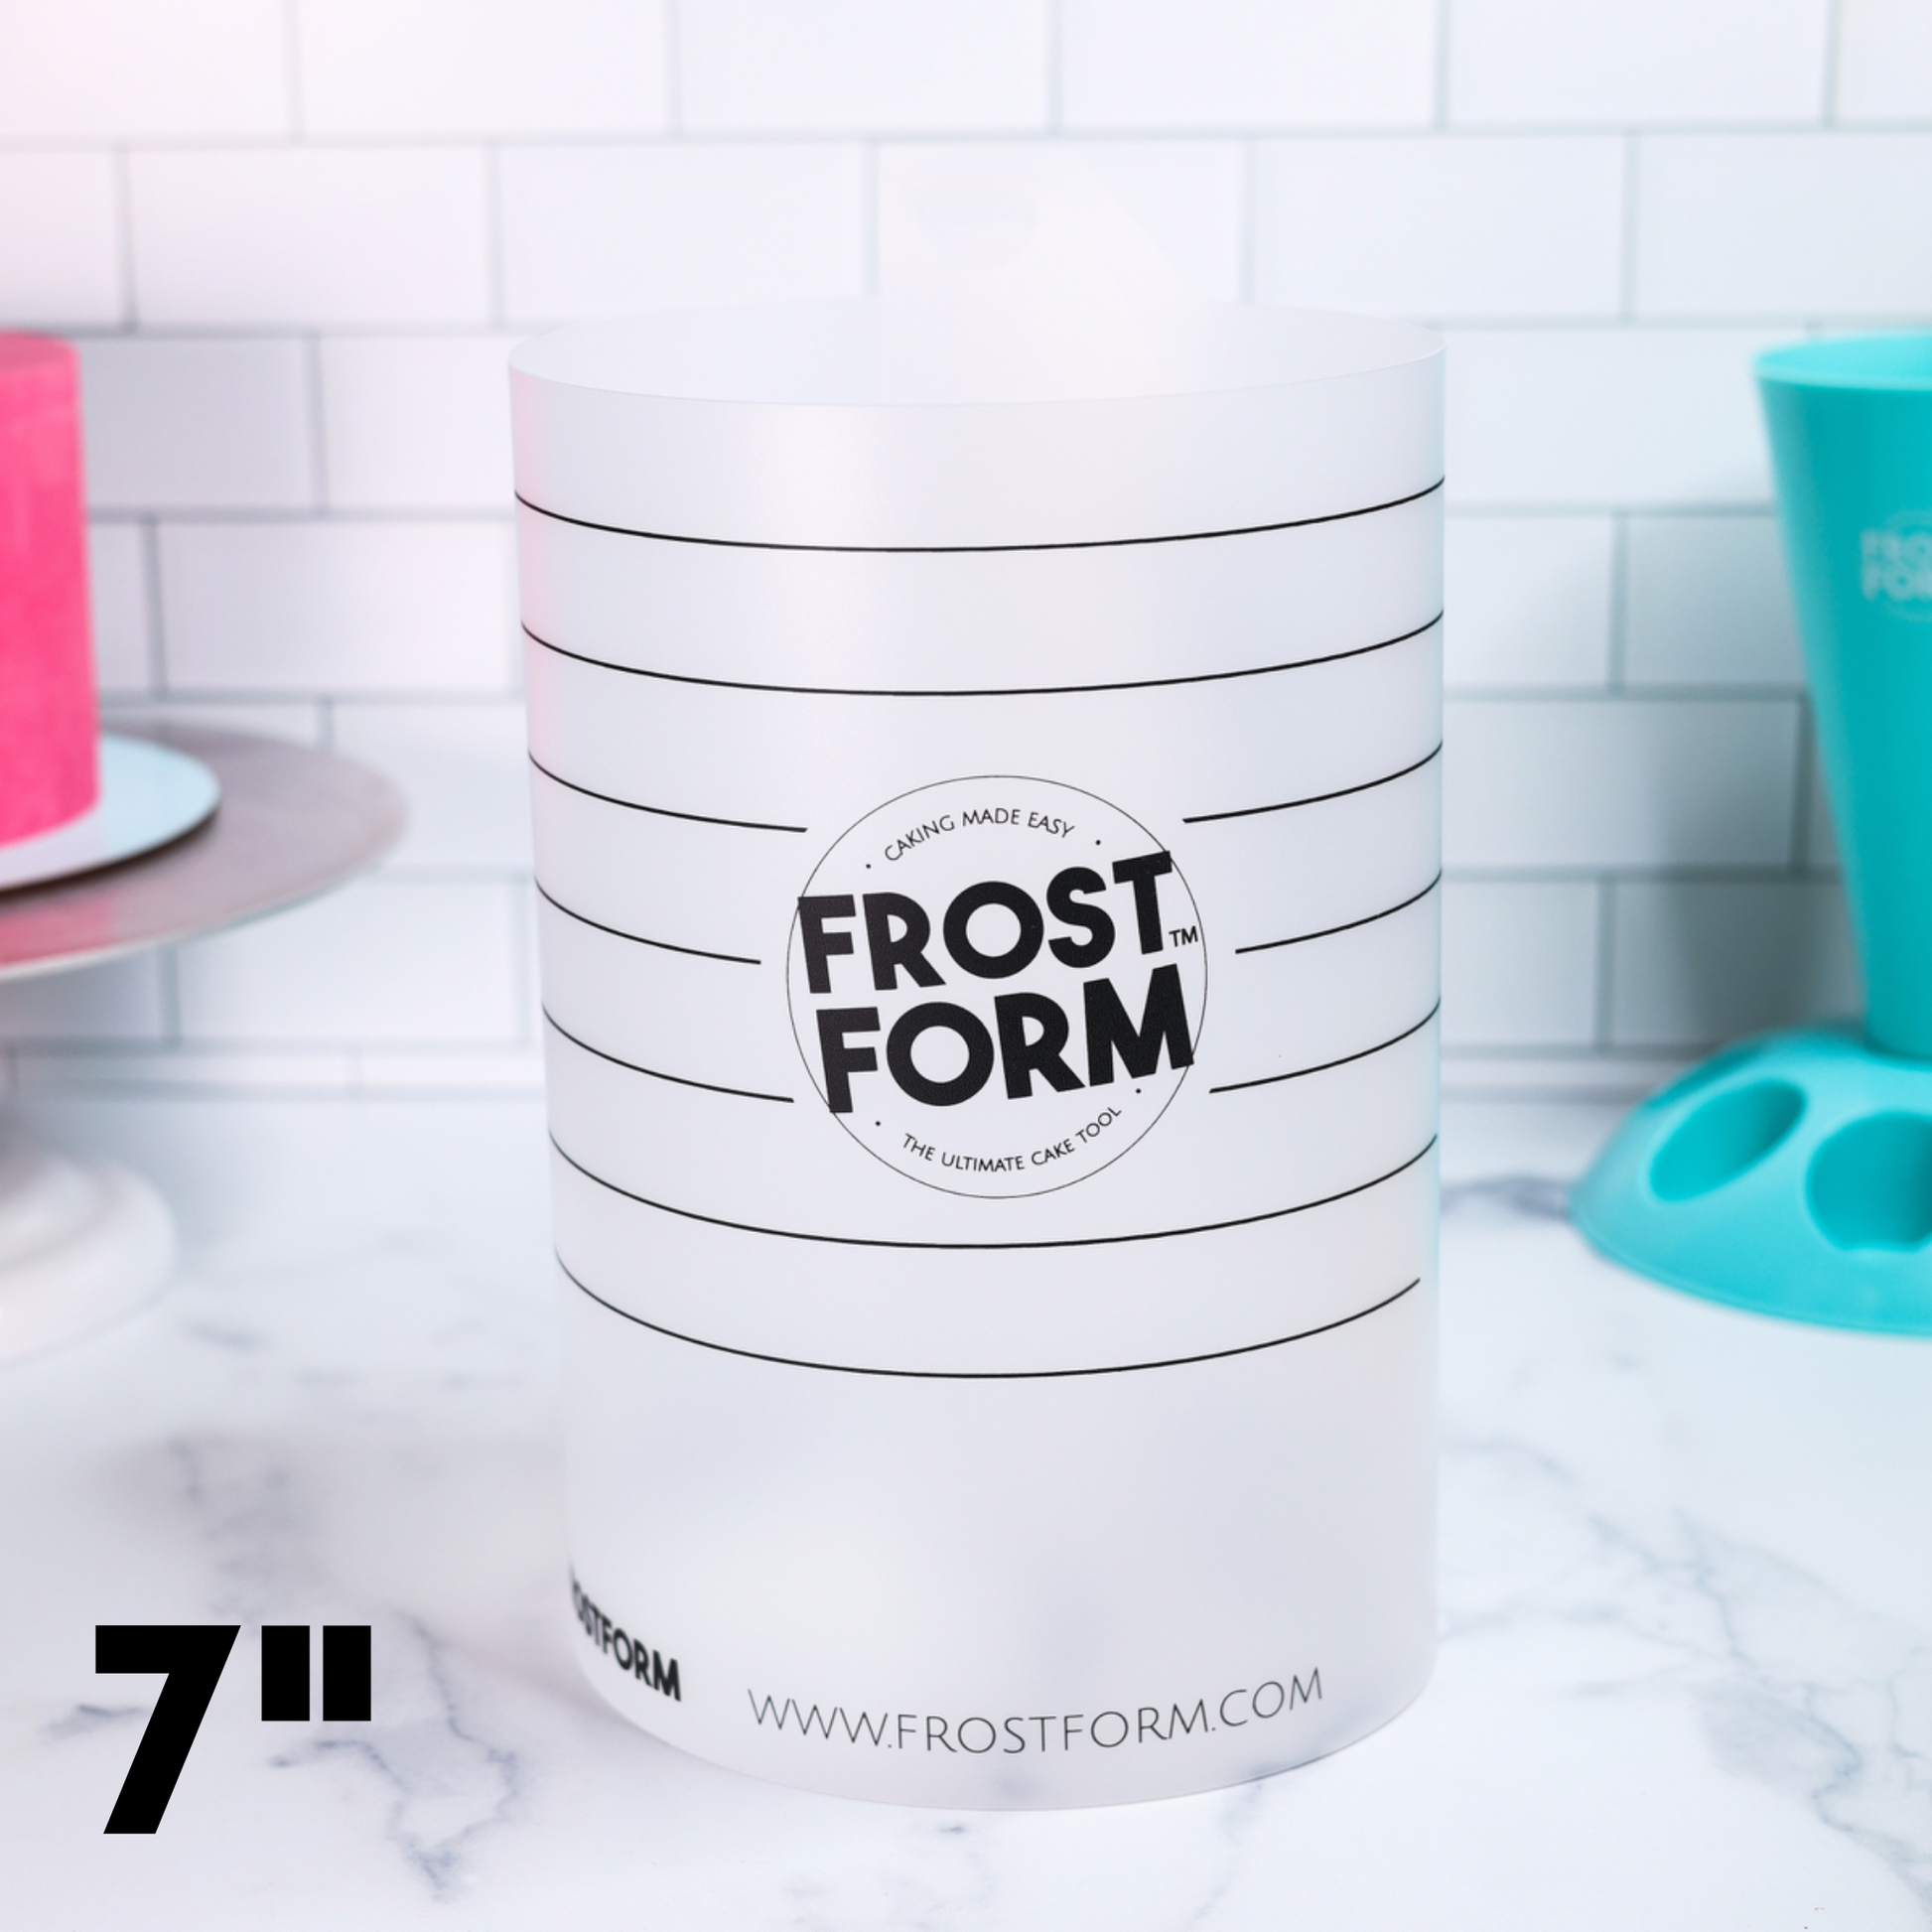  Frost Form - Starter + Kit (6 inch) 7-Piece Set, Professional-Quality, Food-Grade Plastic, Perfectly Straight Cakes, Beginners and Pros